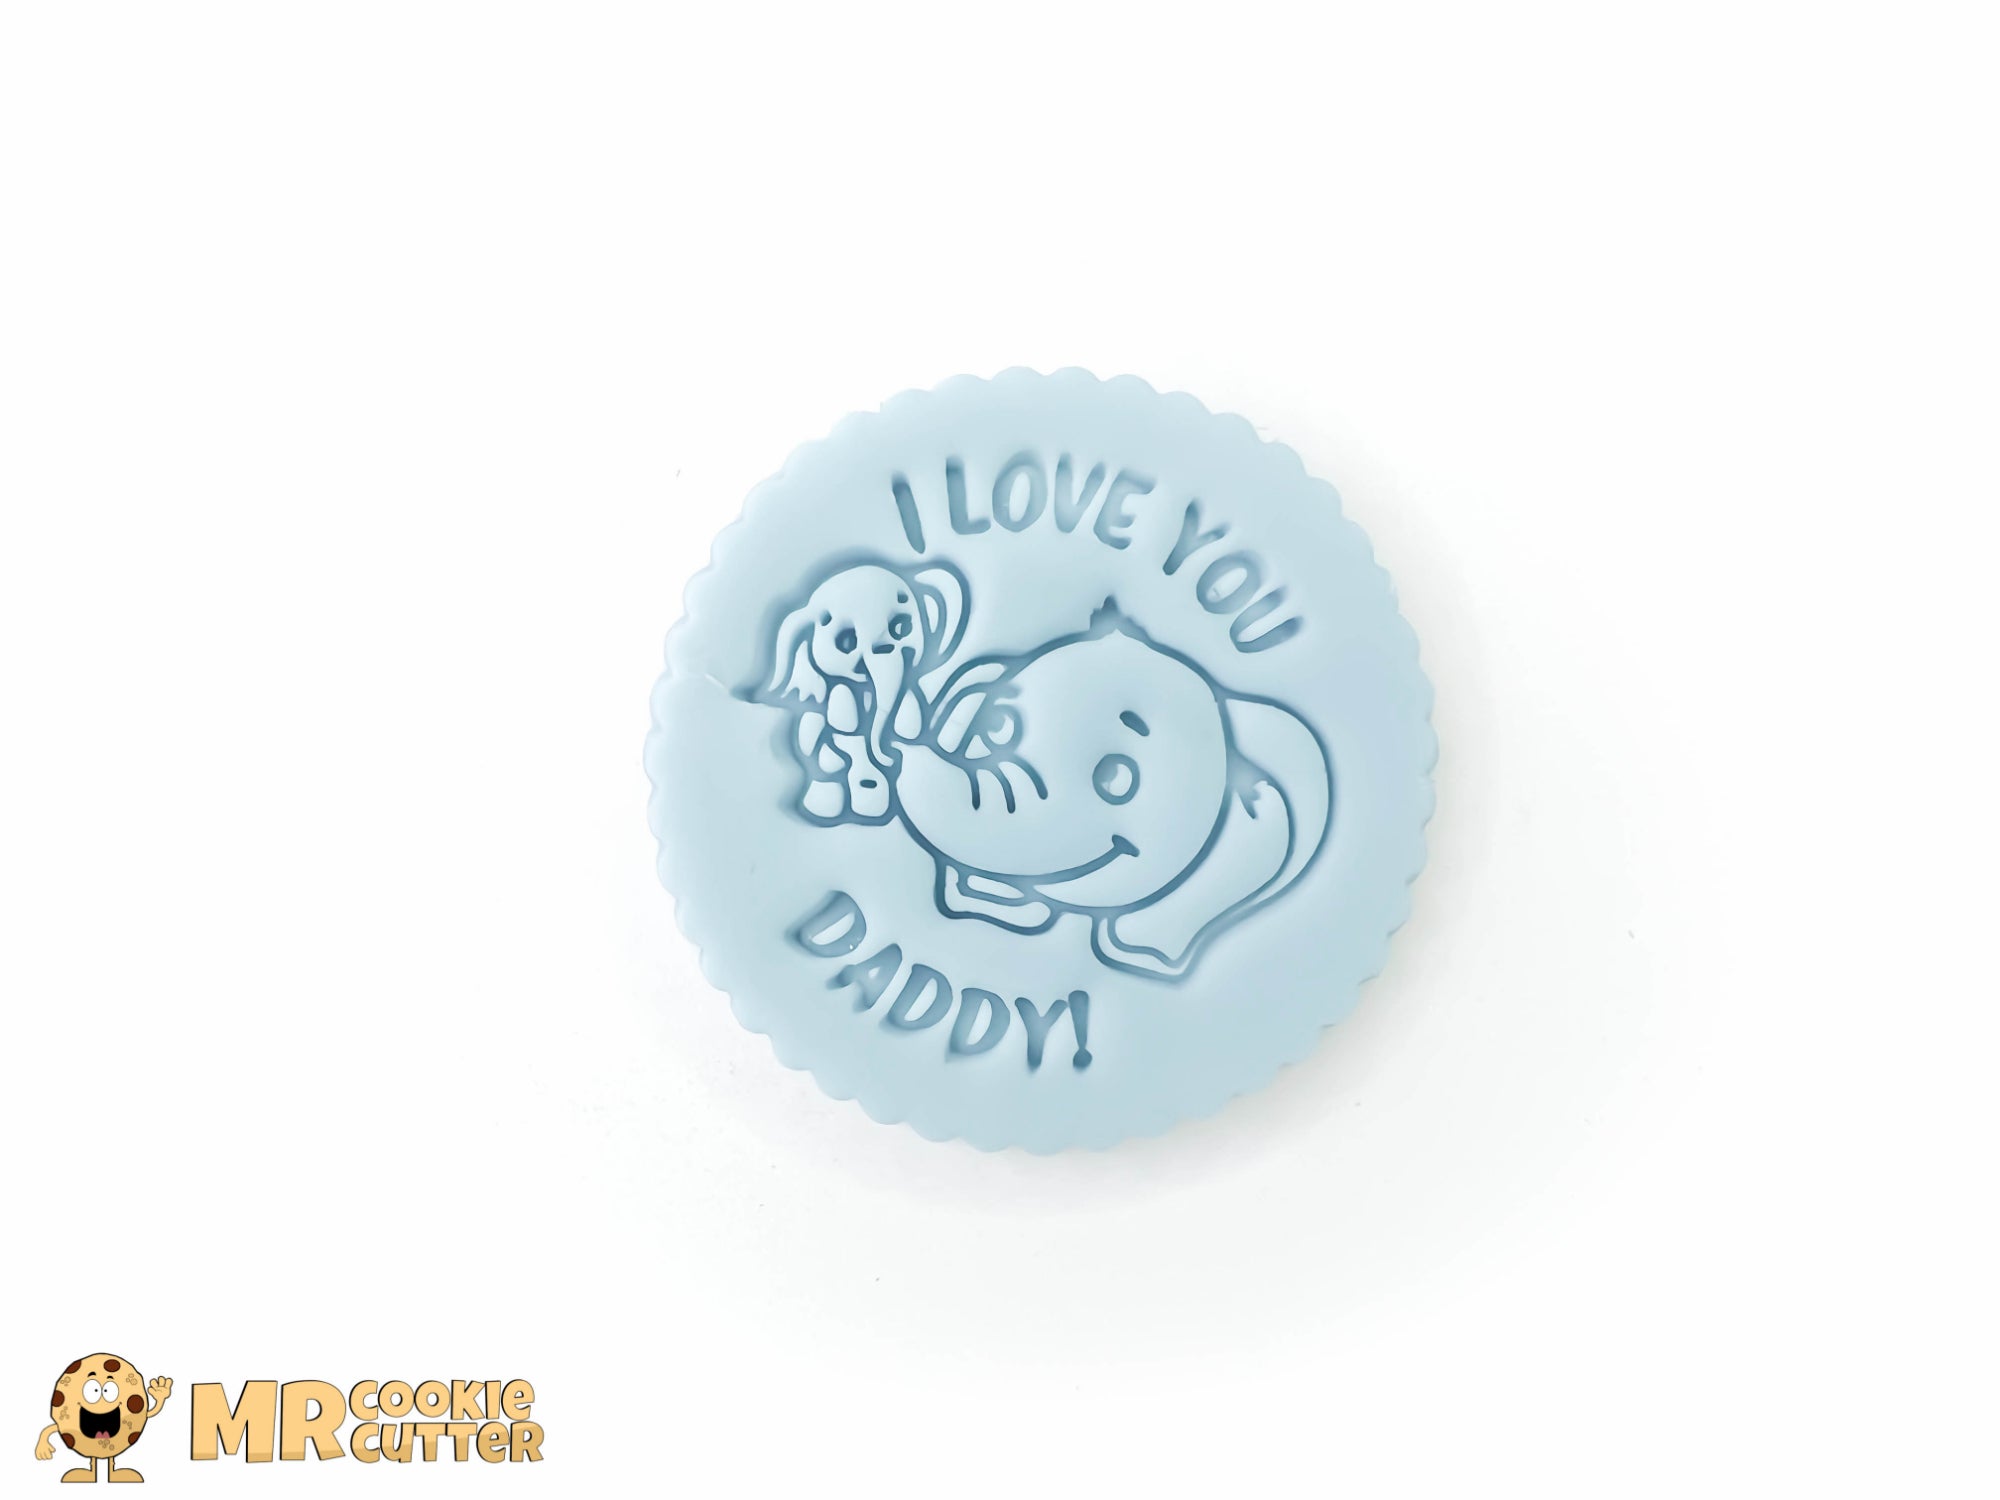 I Love You Daddy Cupcake Topper with Elephant design